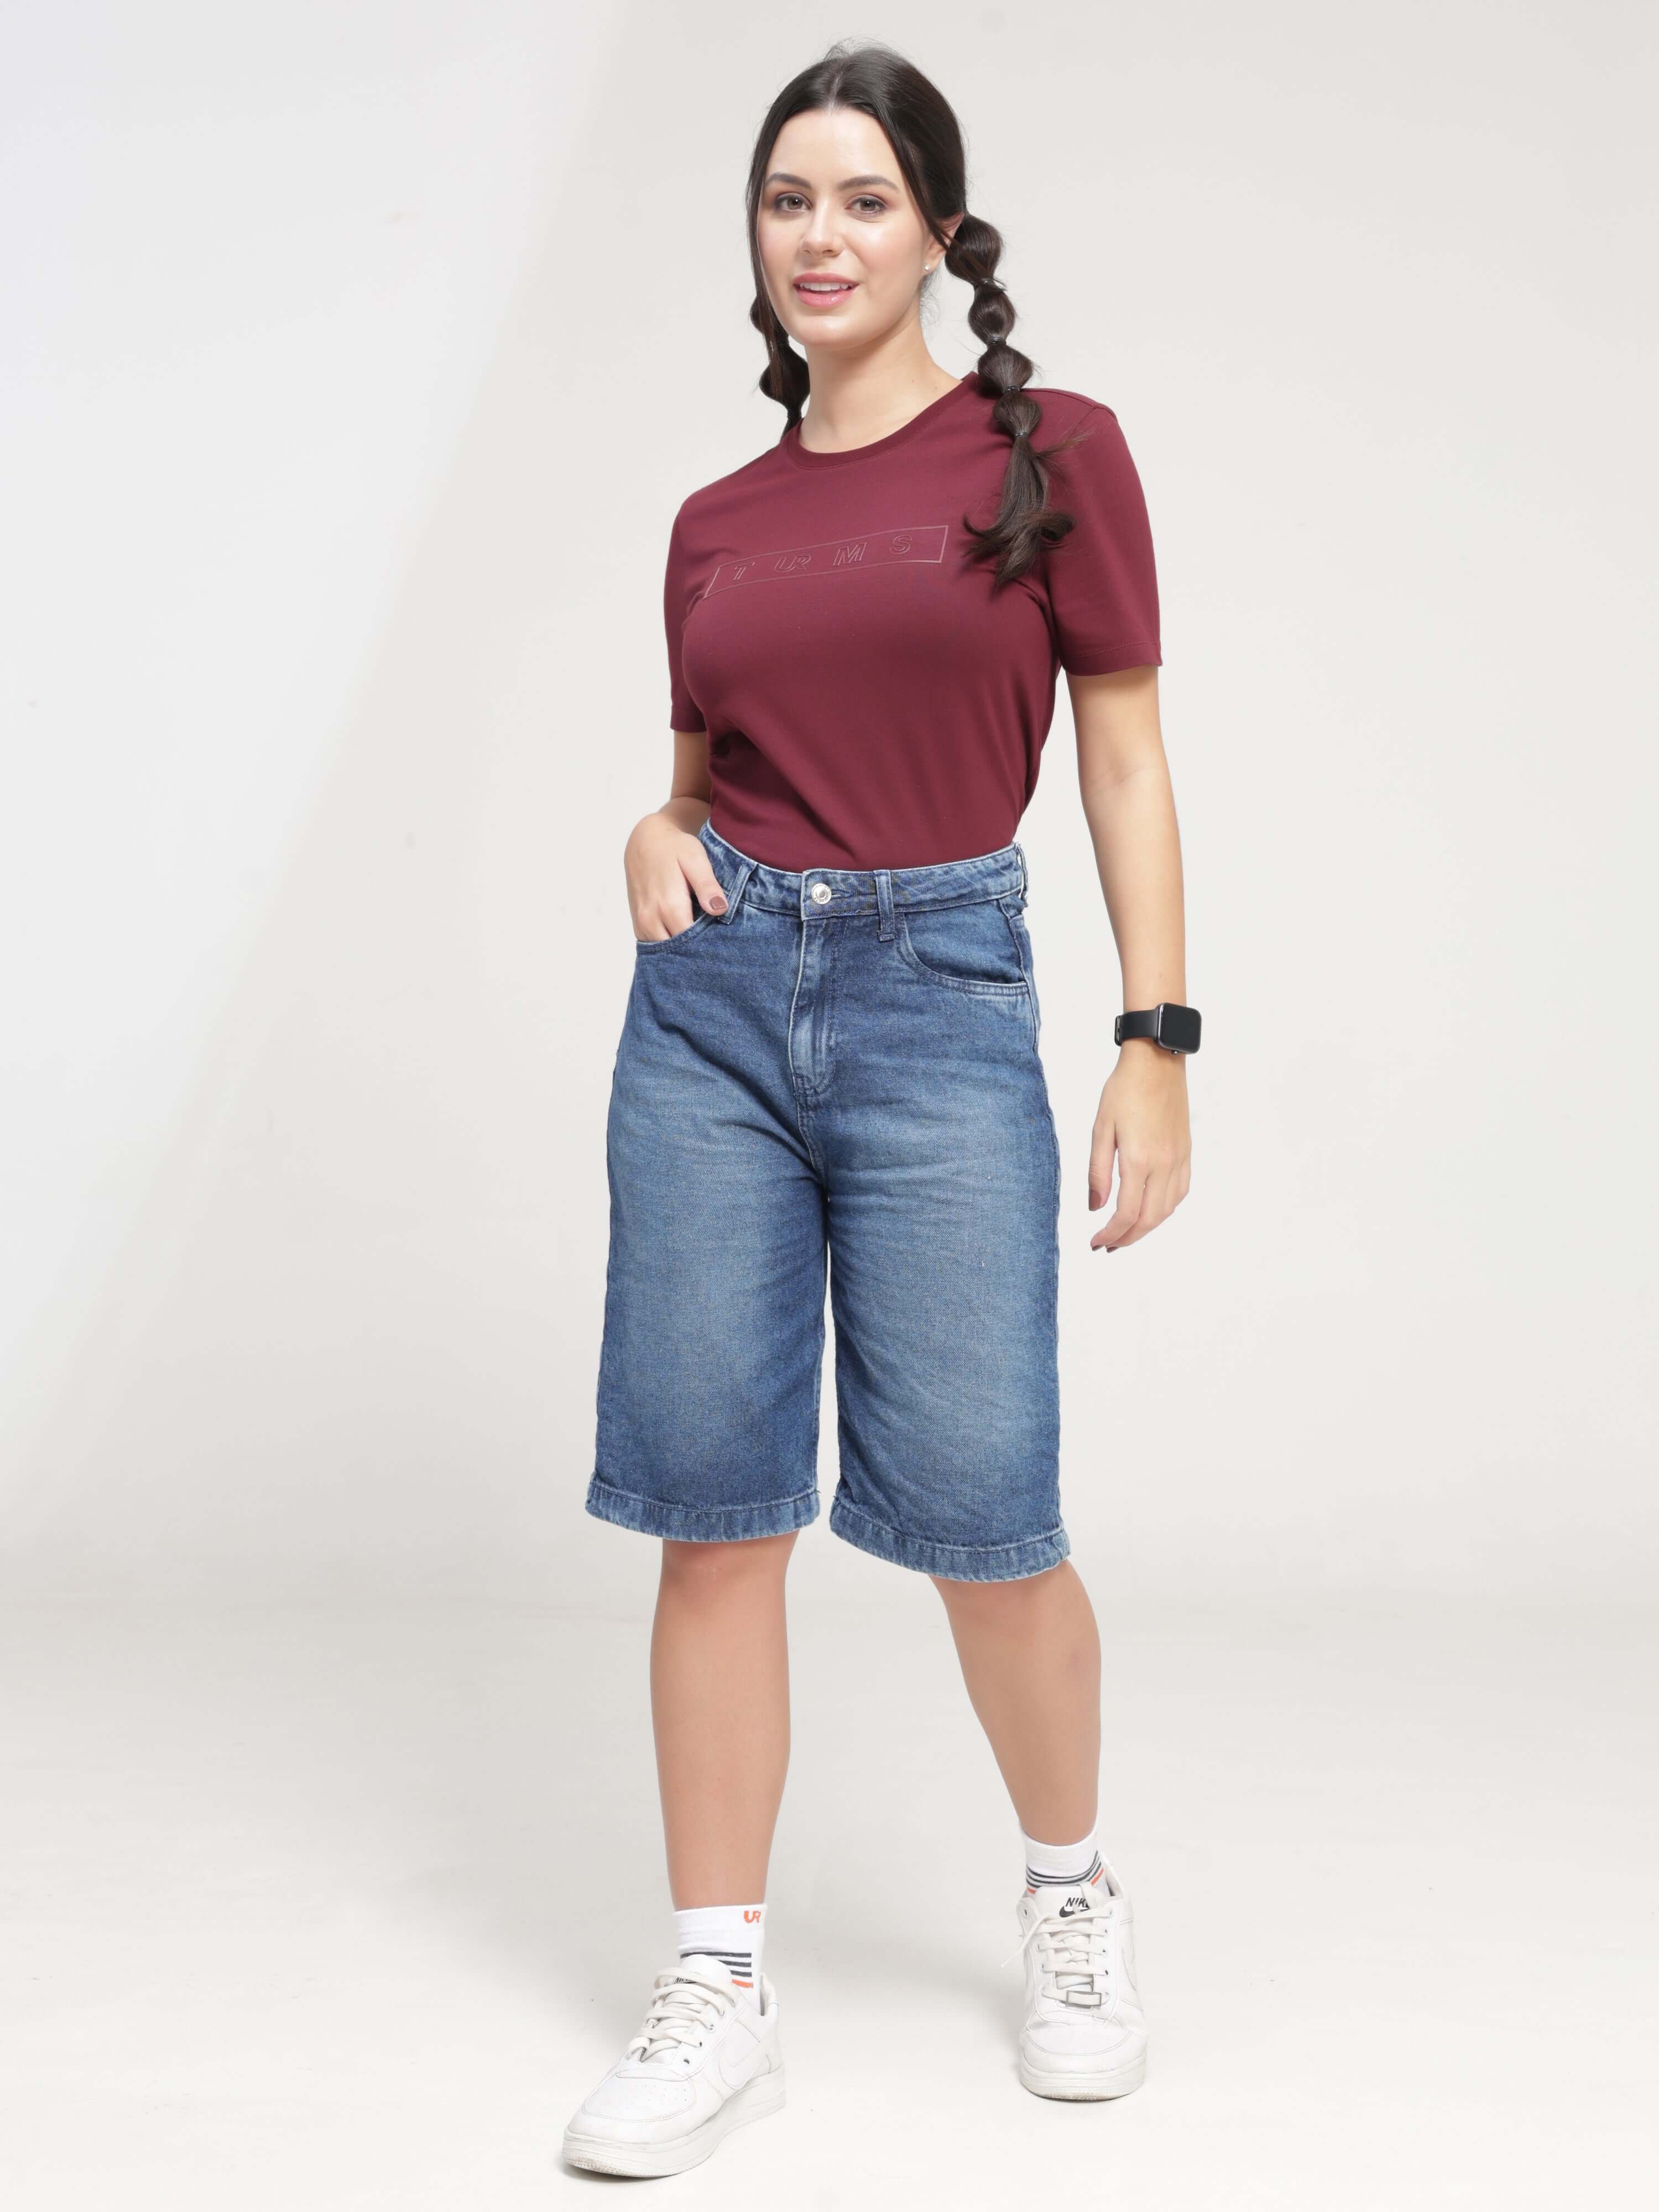 Woman wearing Burgundy Elite round-neck Turms T-shirt with tailored fit, stain-proof, anti-odor, and stretchable fabric, paired with denim shorts.